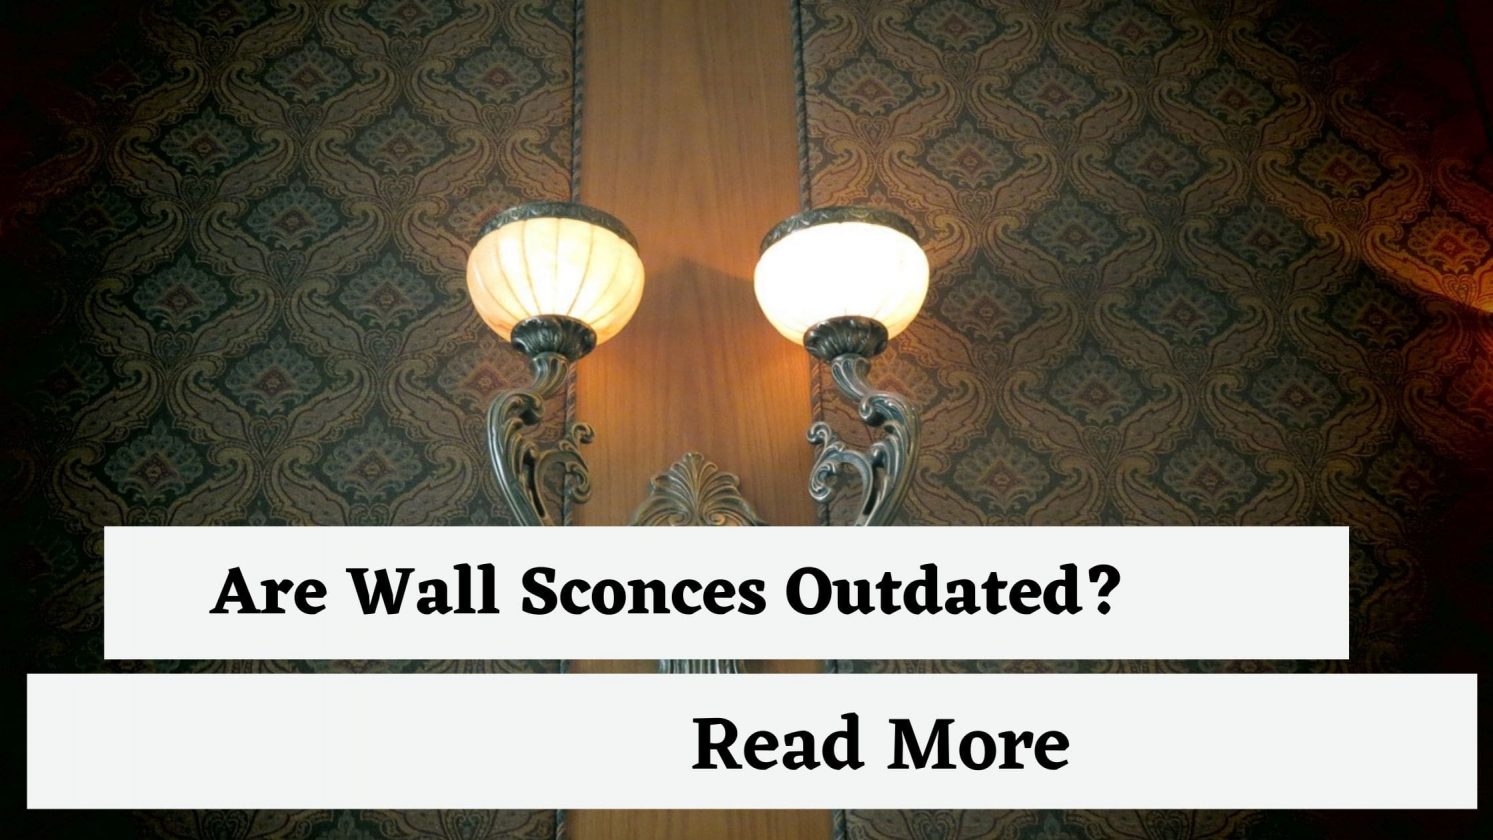 Are wall sconces outdated?